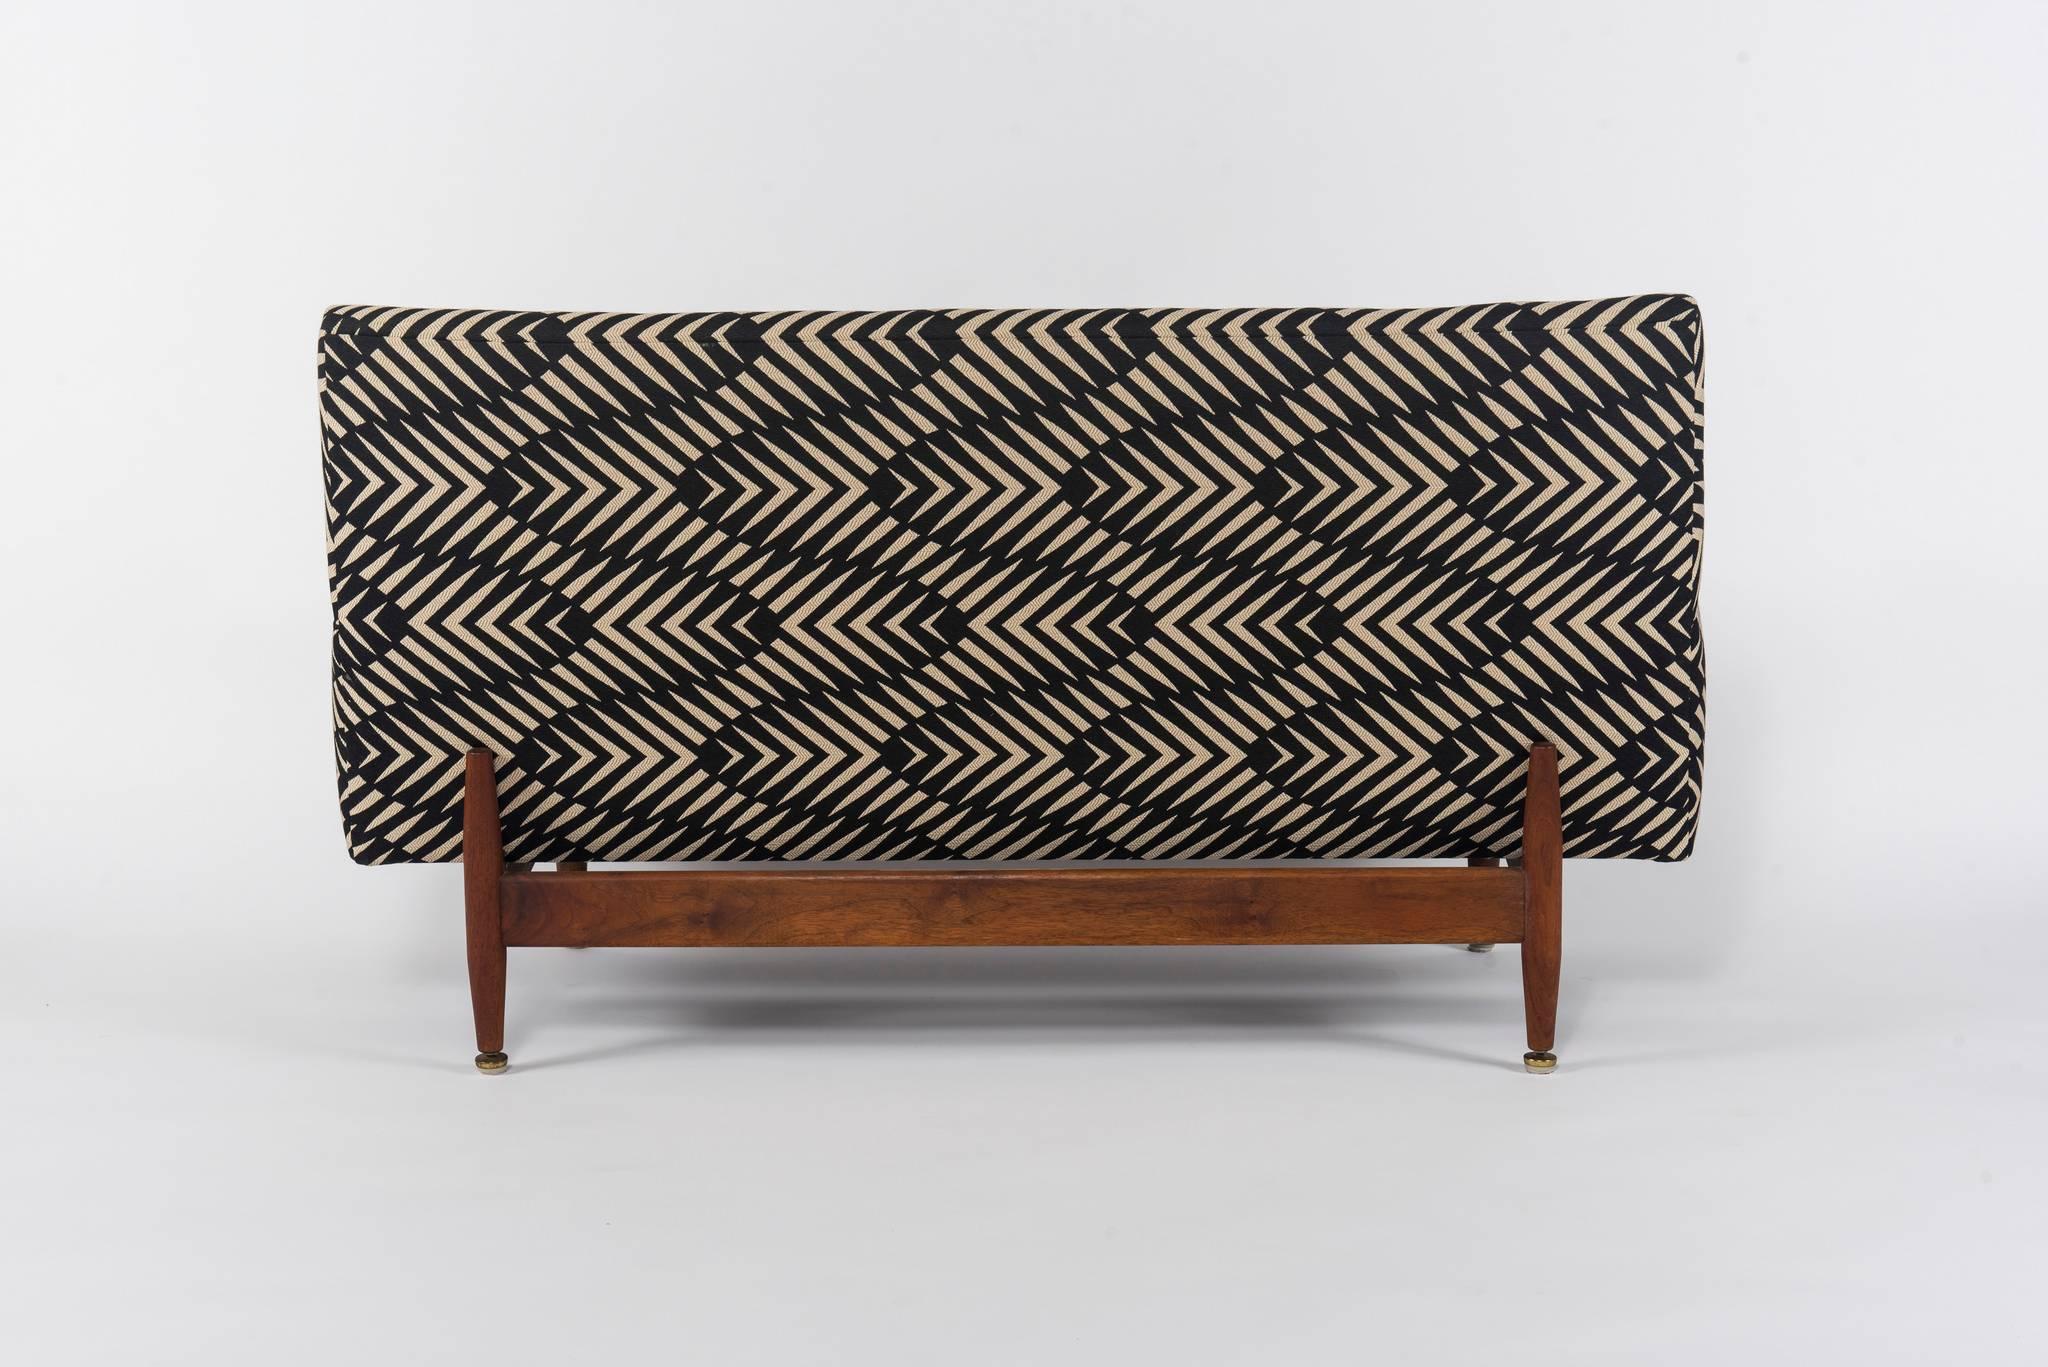 Wood Midcentury Loveseat Attributed to Jens Risom